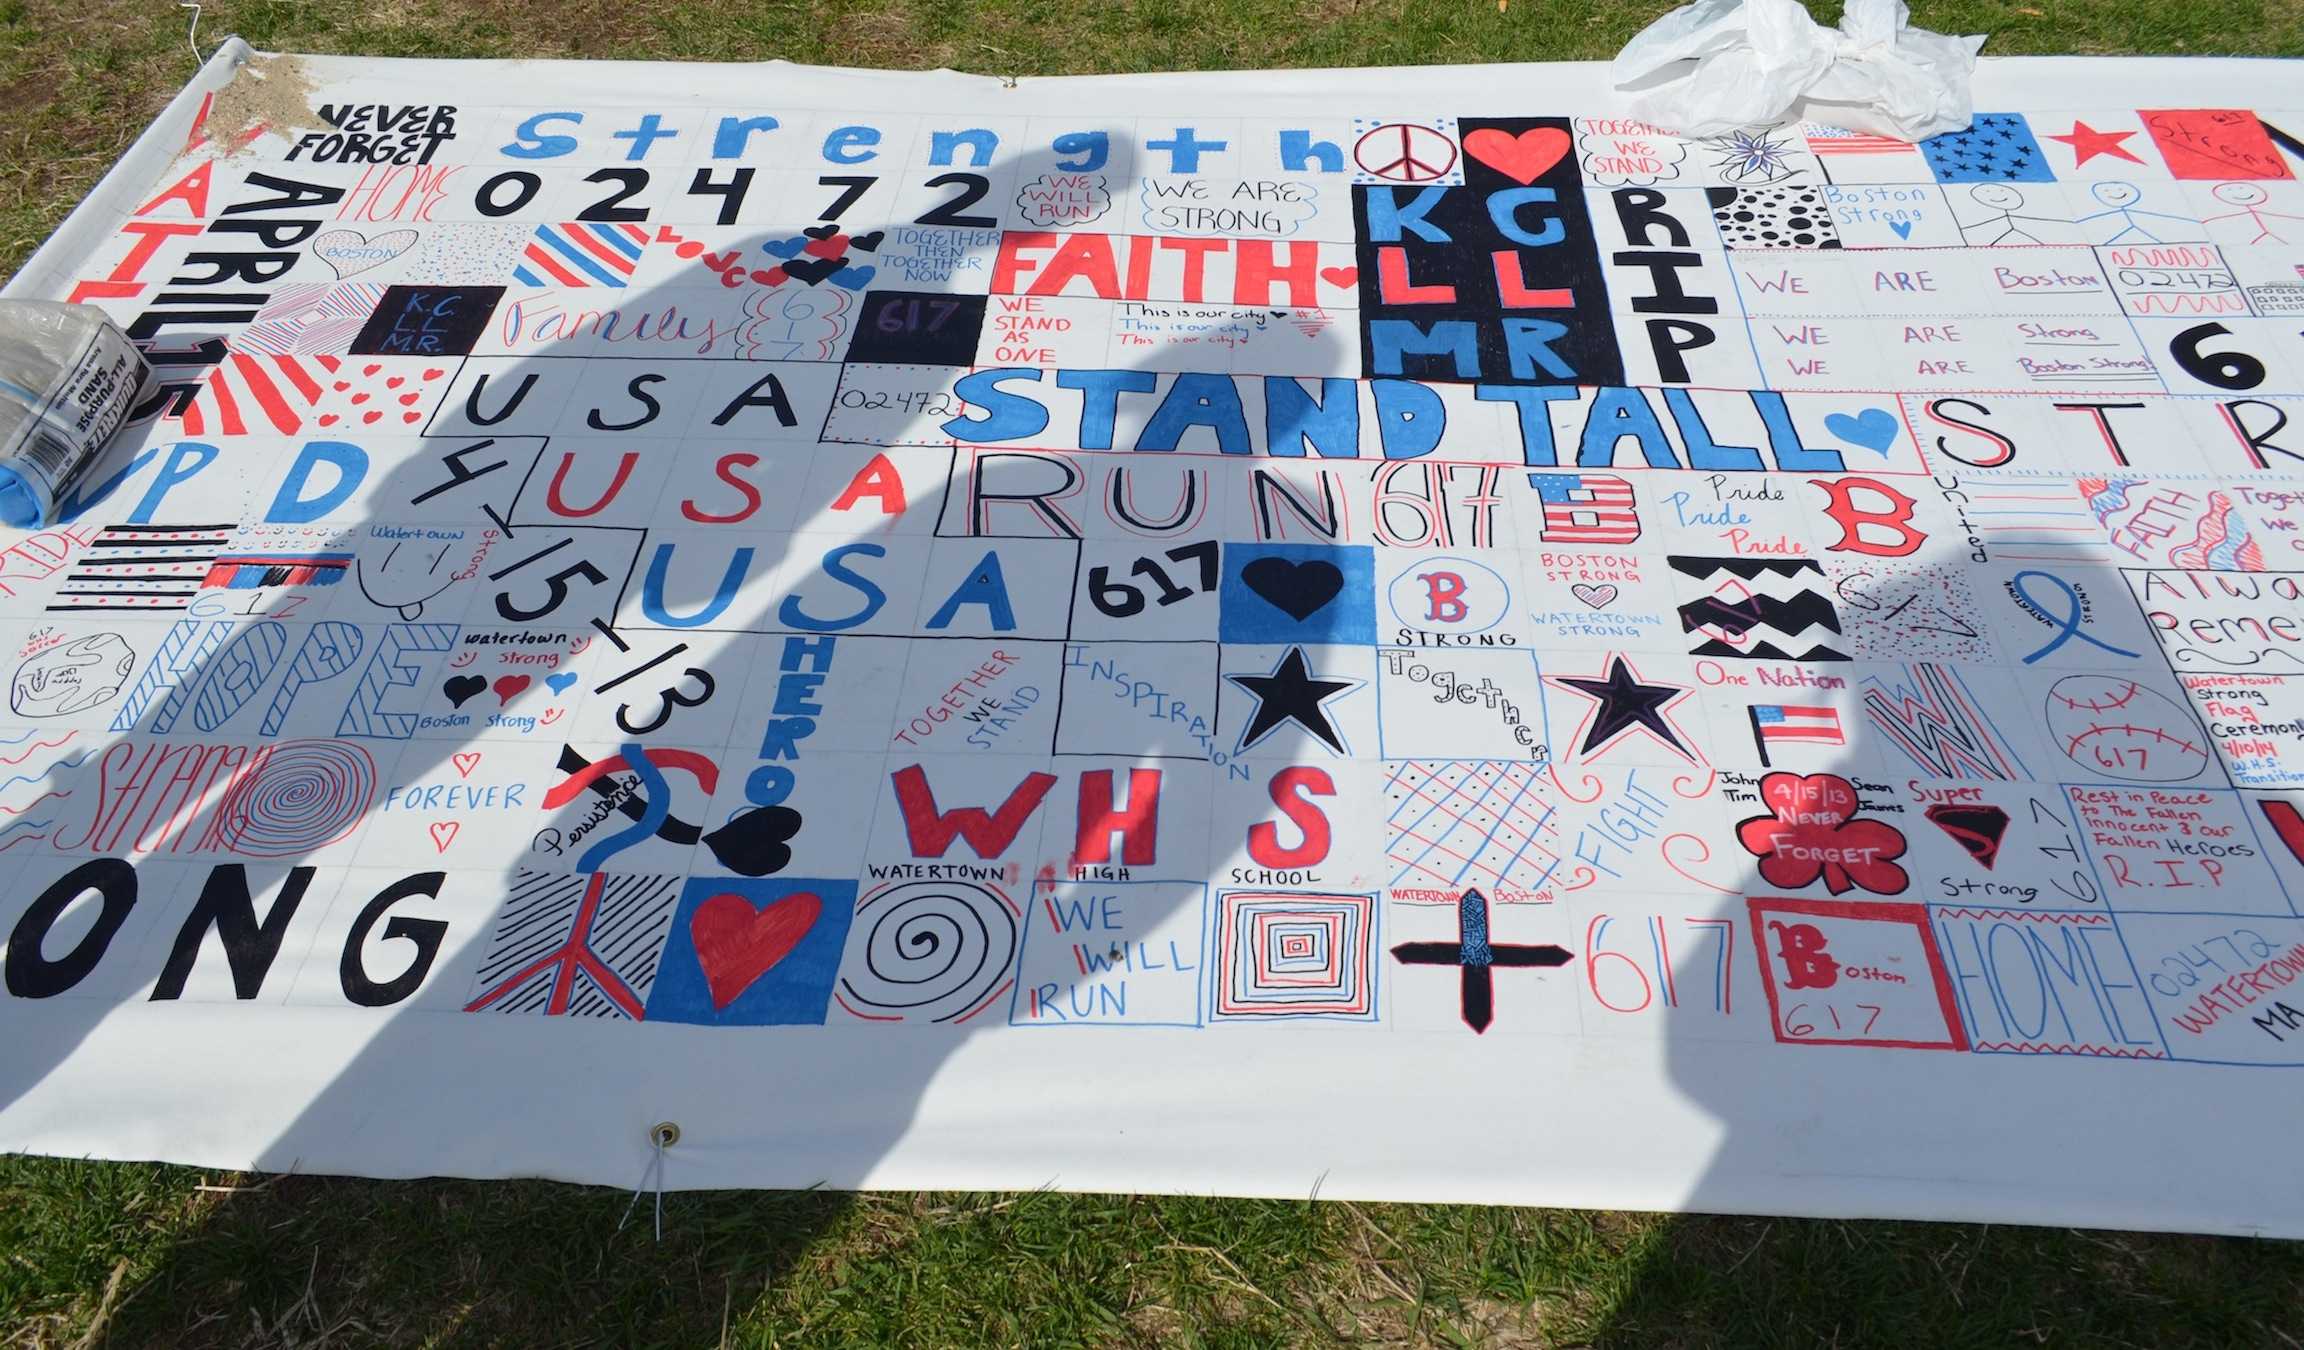 Prayer canvases from around the country, including this one decorated by Watertown High School students, cover the Boston Common during Patriots Day weekend. The canvases were made in a response to the 2013 Marathon bombings.